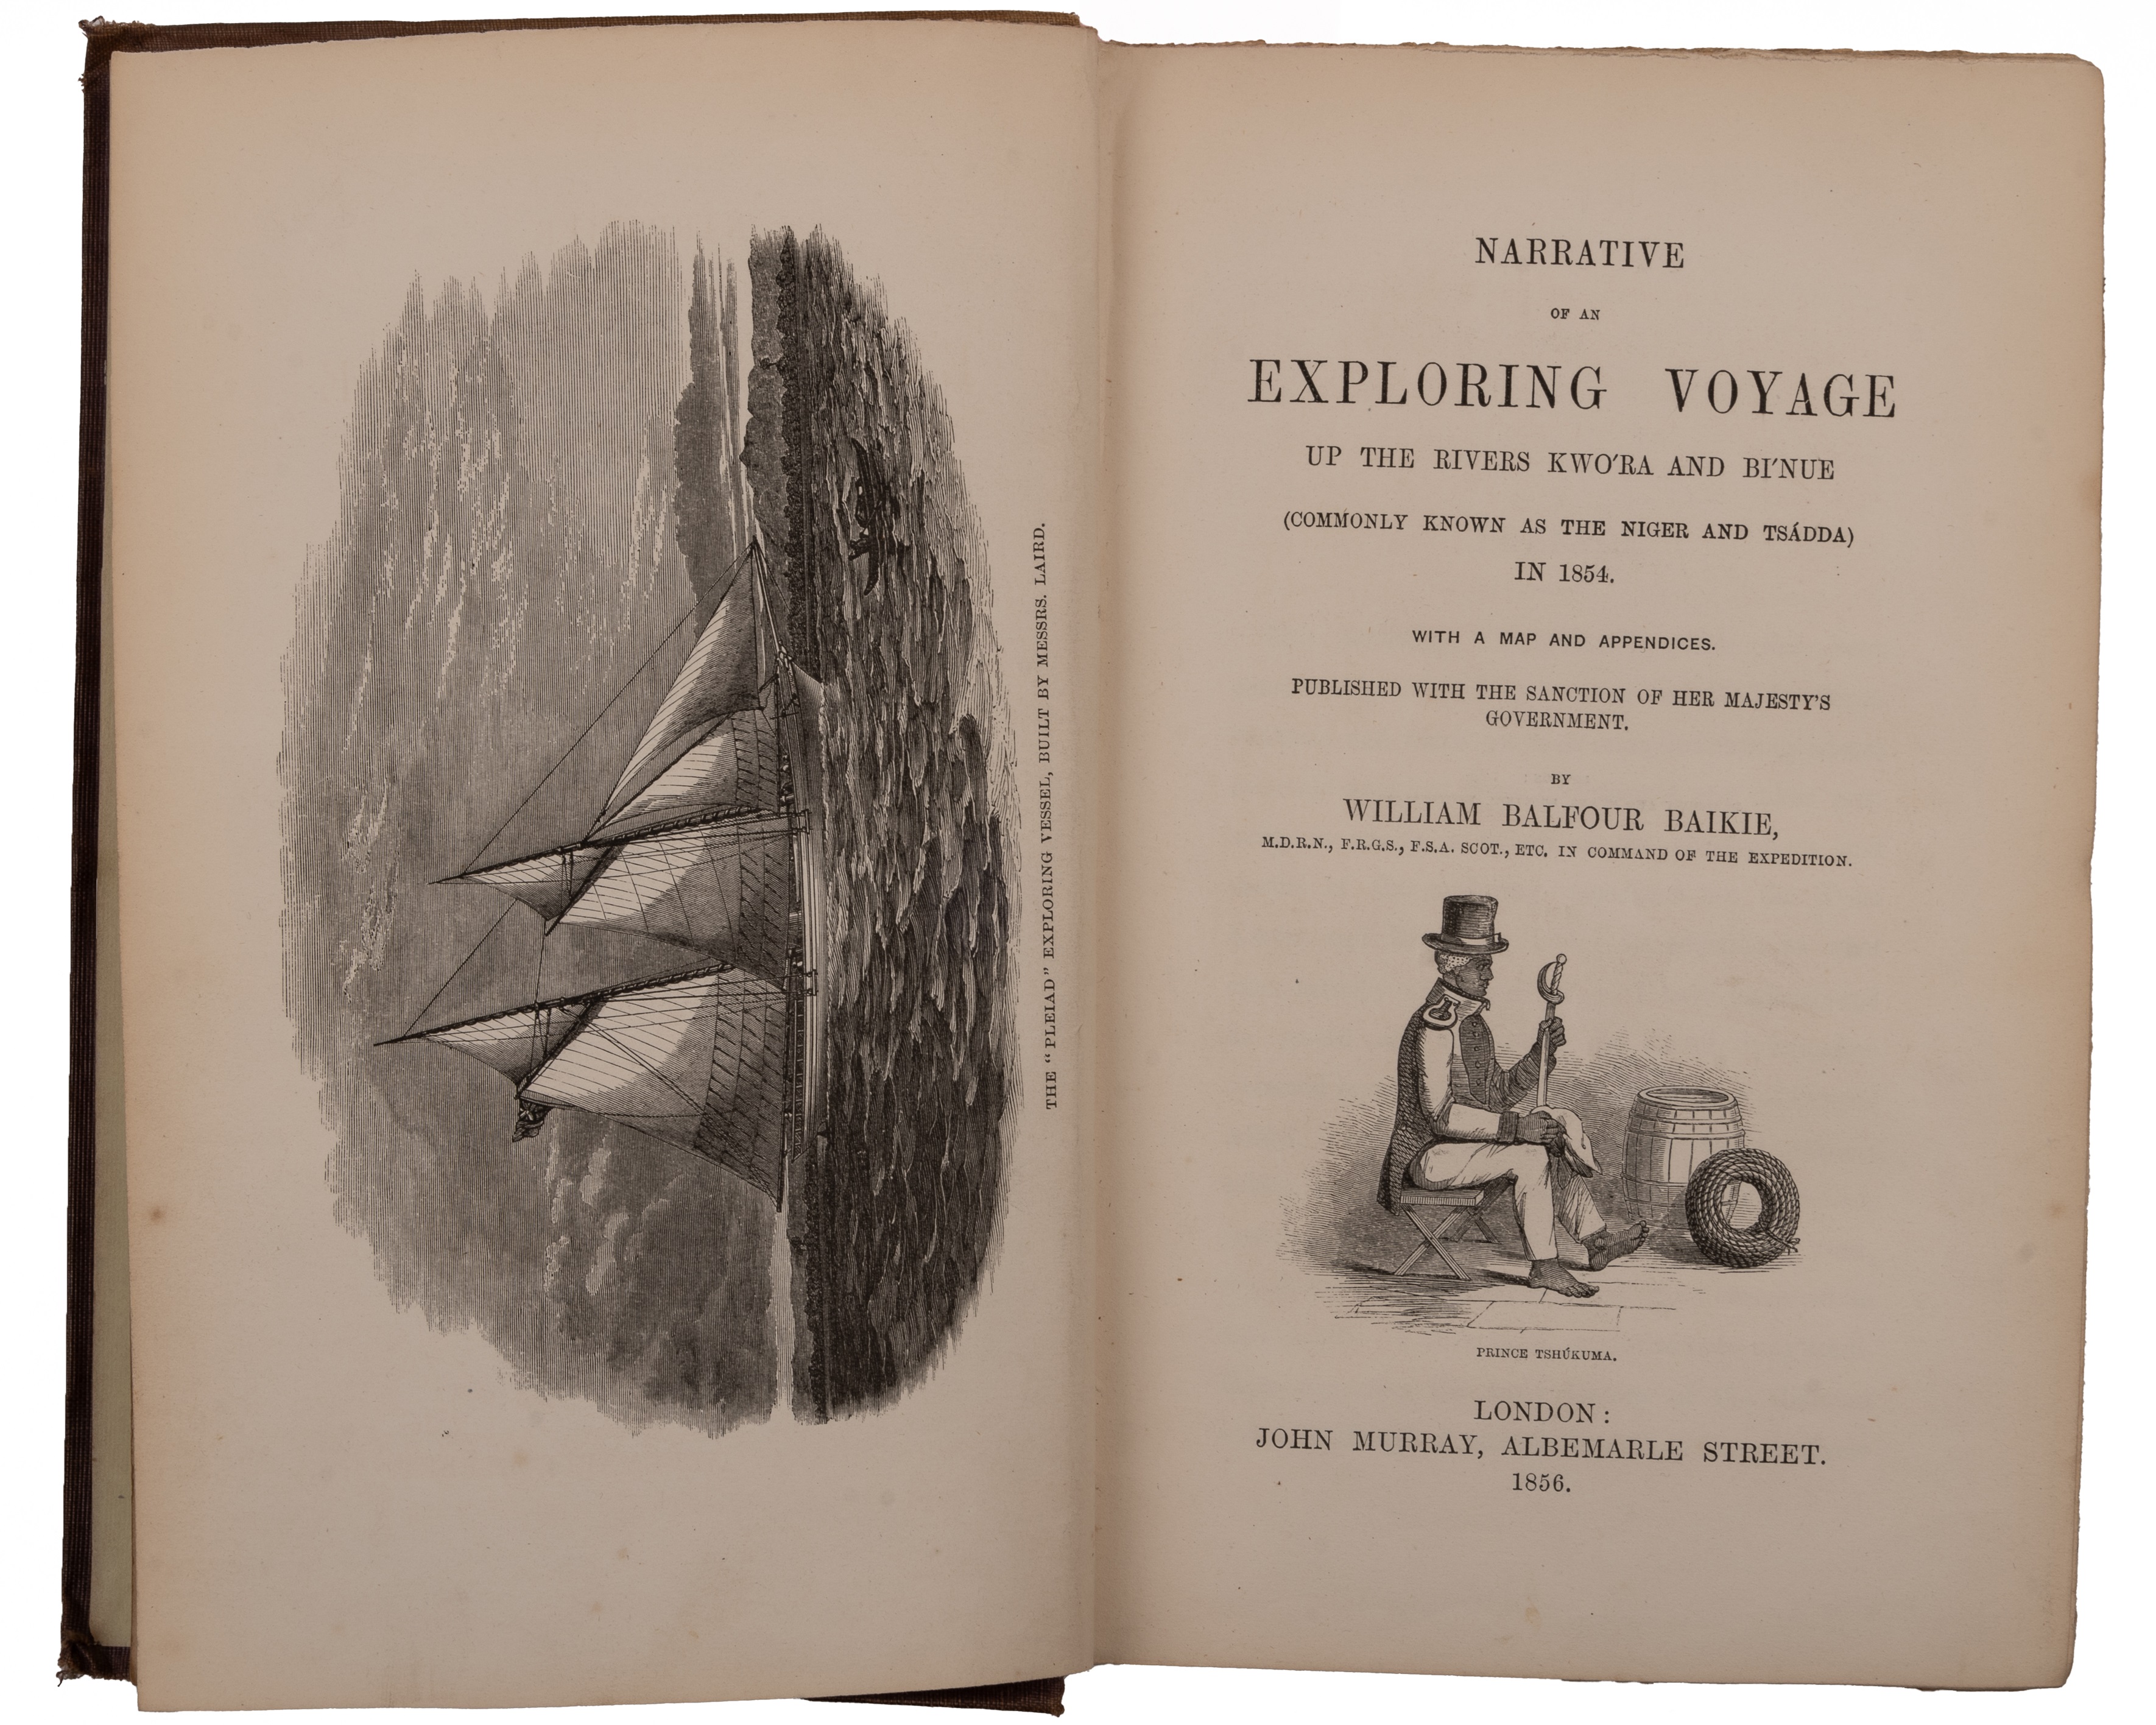 Baike (William Balfour) 'Narrative of an Exploring Voyage up the rivers Kwóra and Binue in 1854'. - Bild 2 aus 3